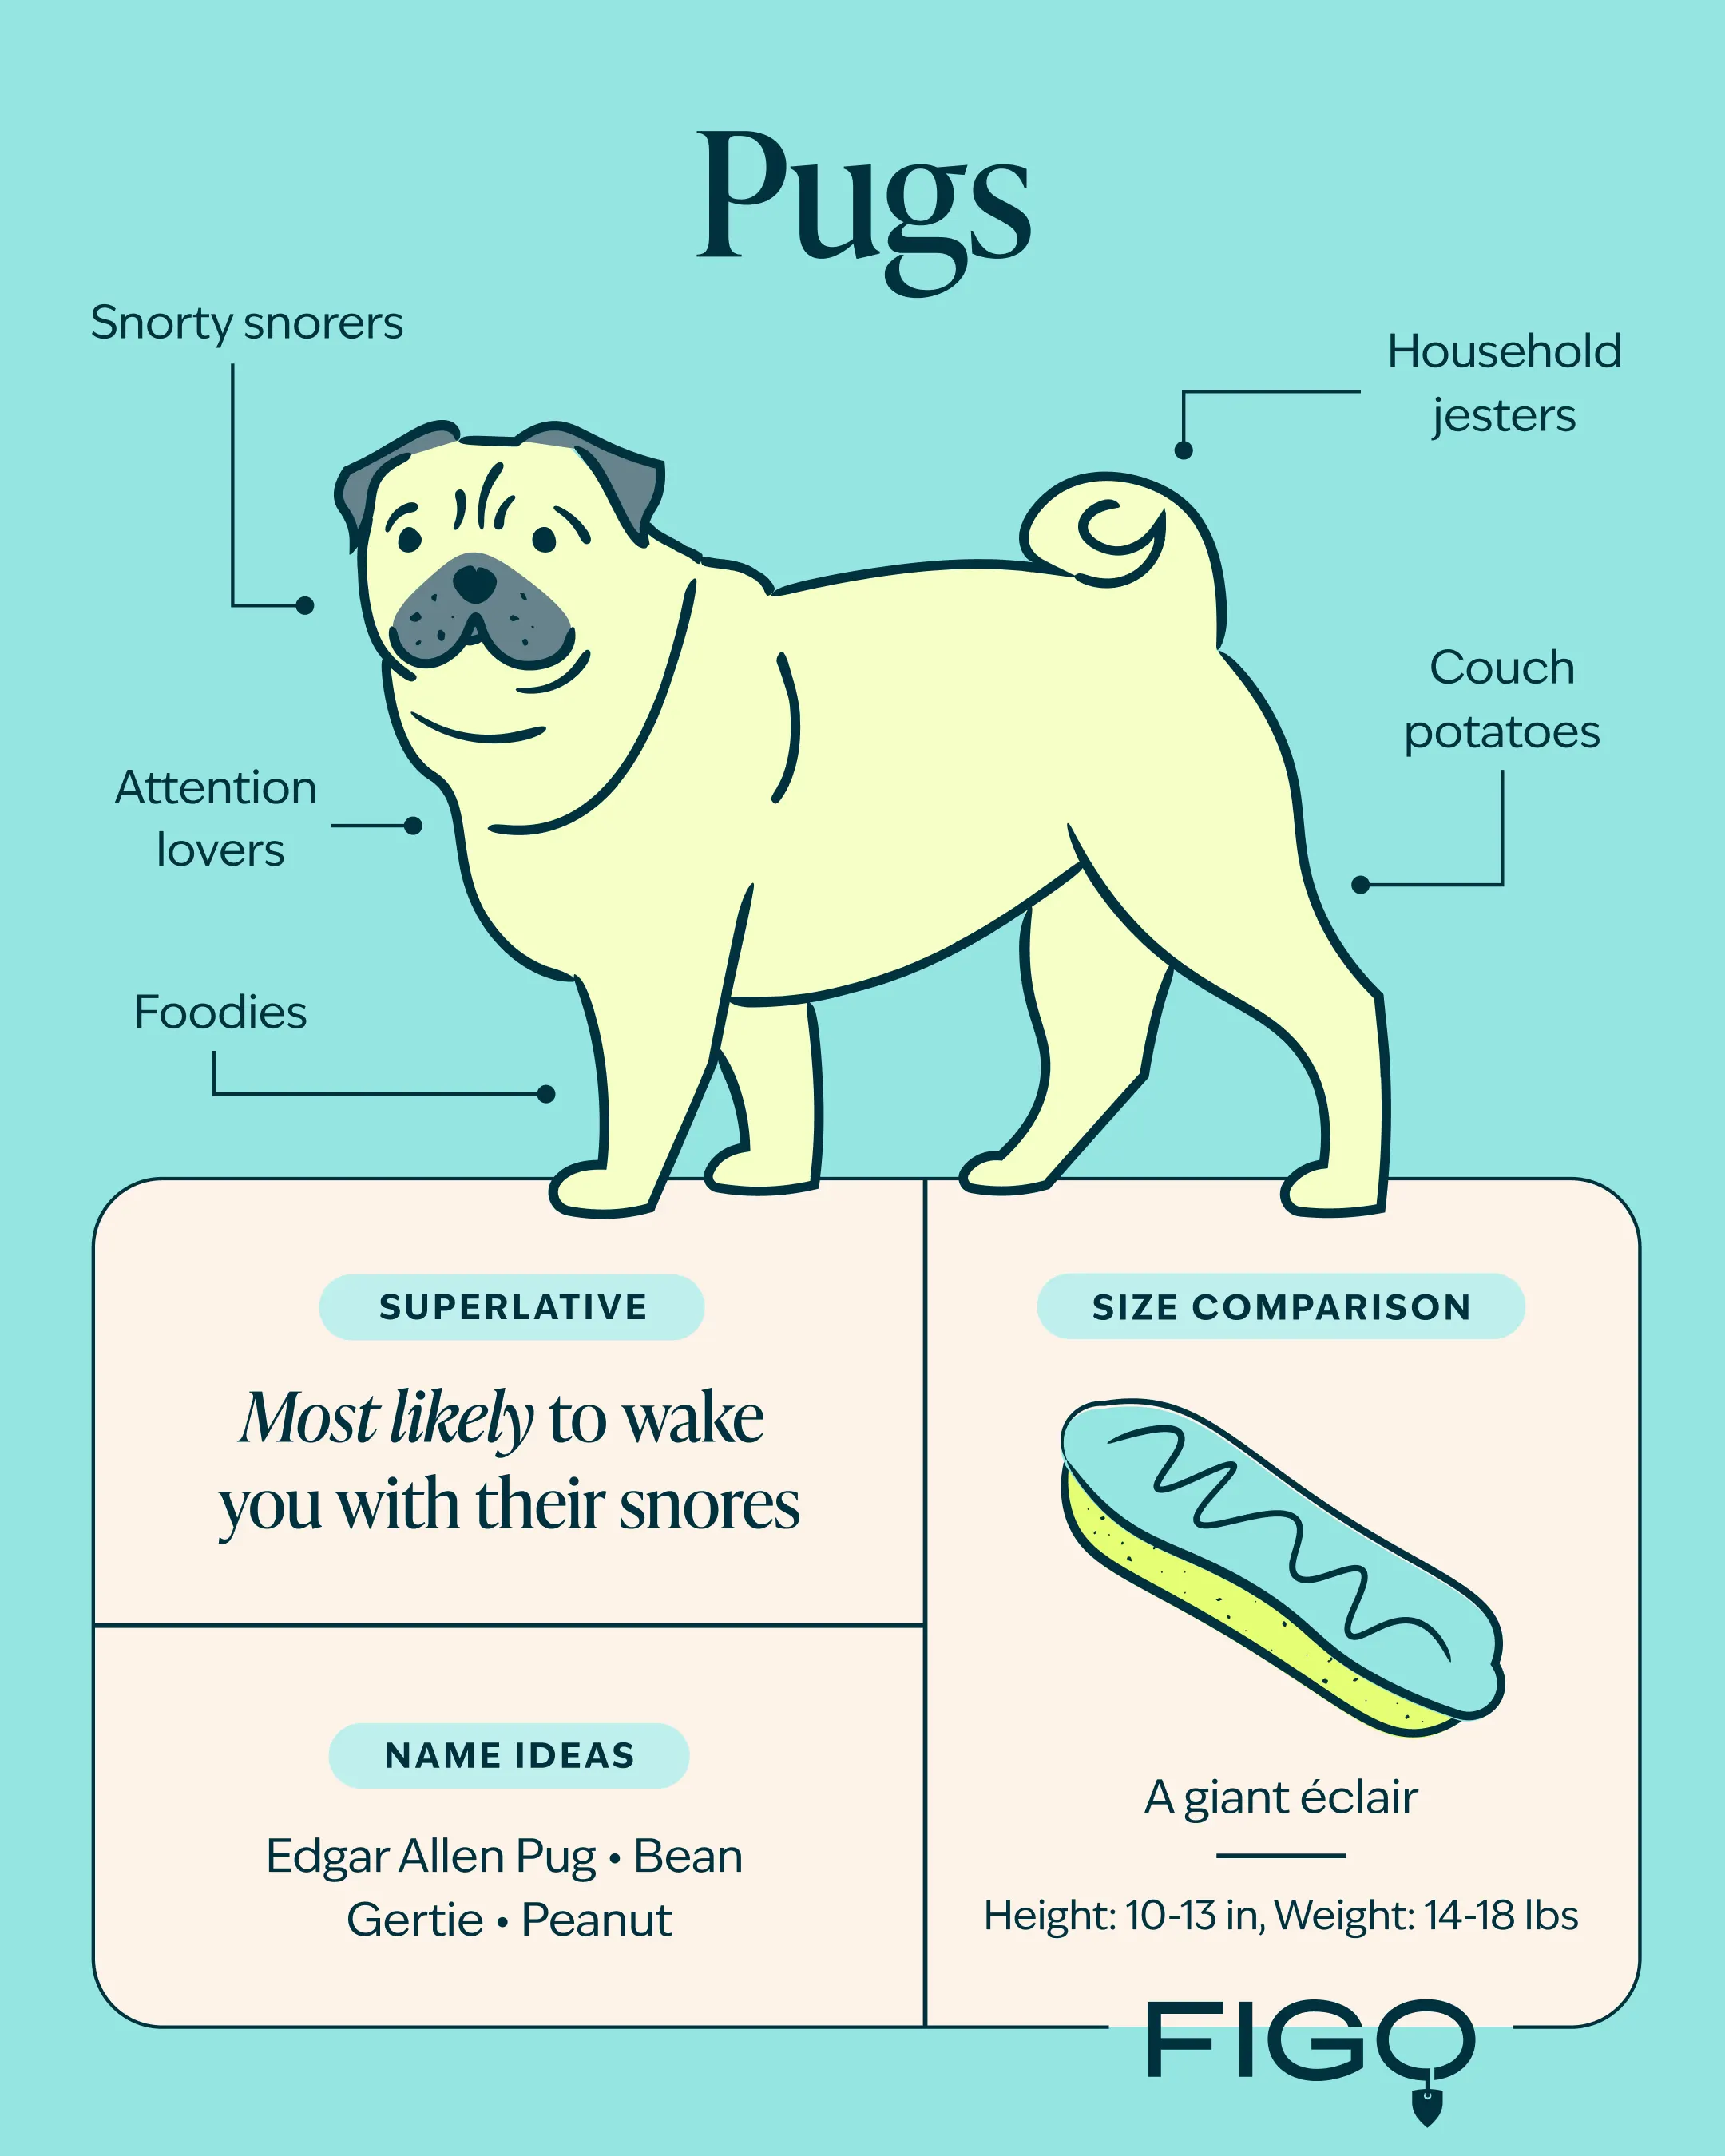 Pug breed guide